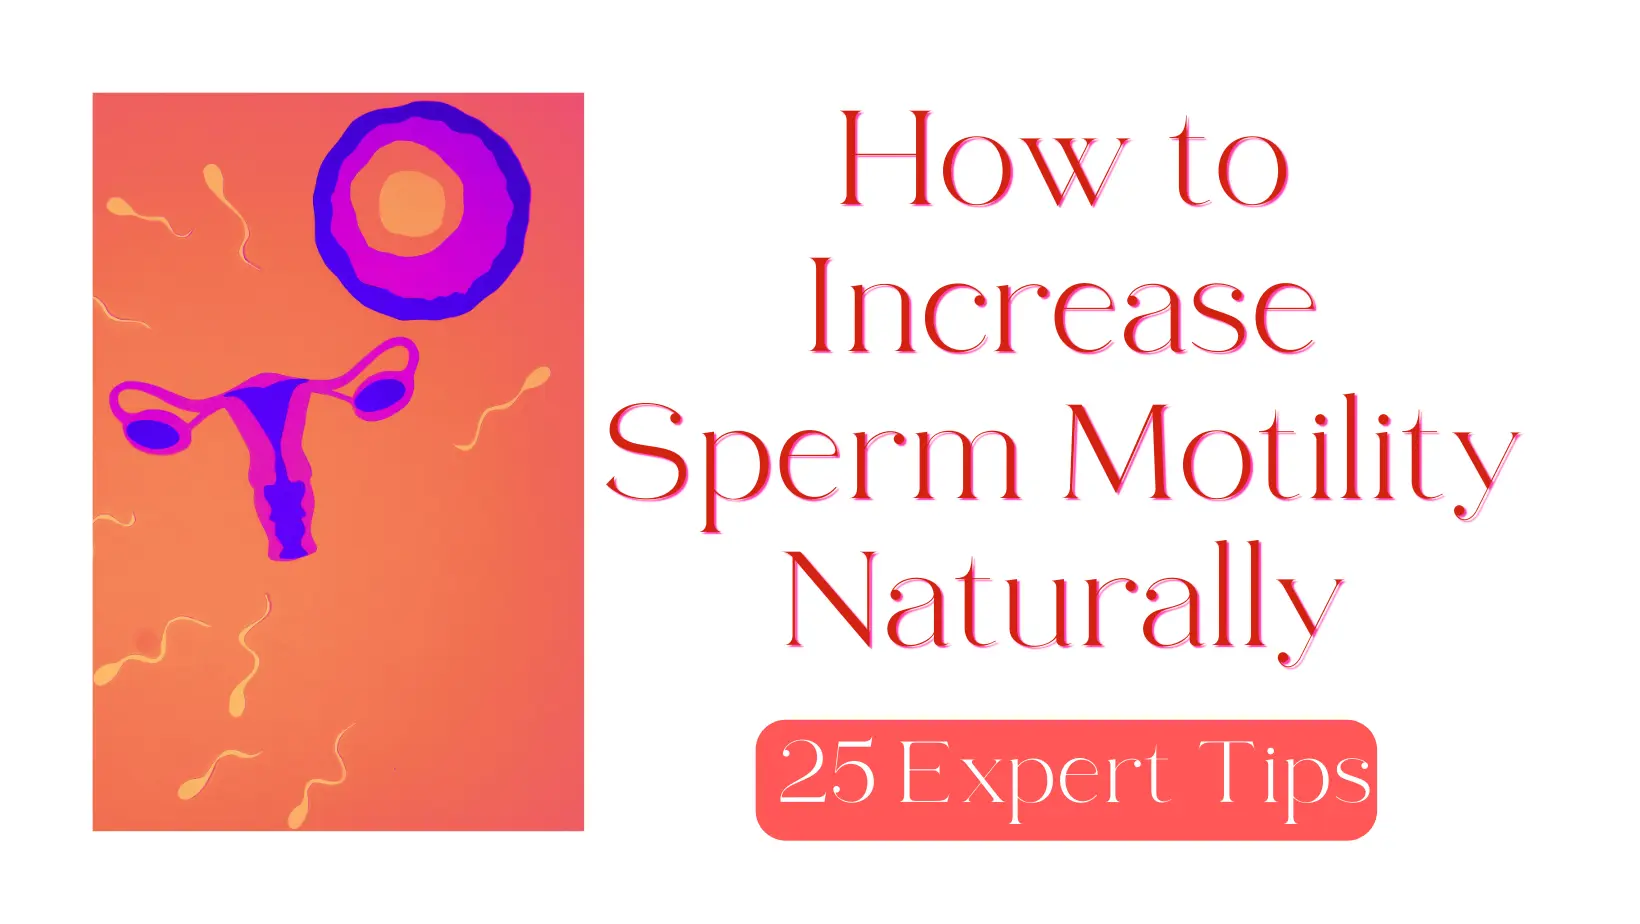 How to Increase Sperm Motility Naturally – 25 Expert Tips